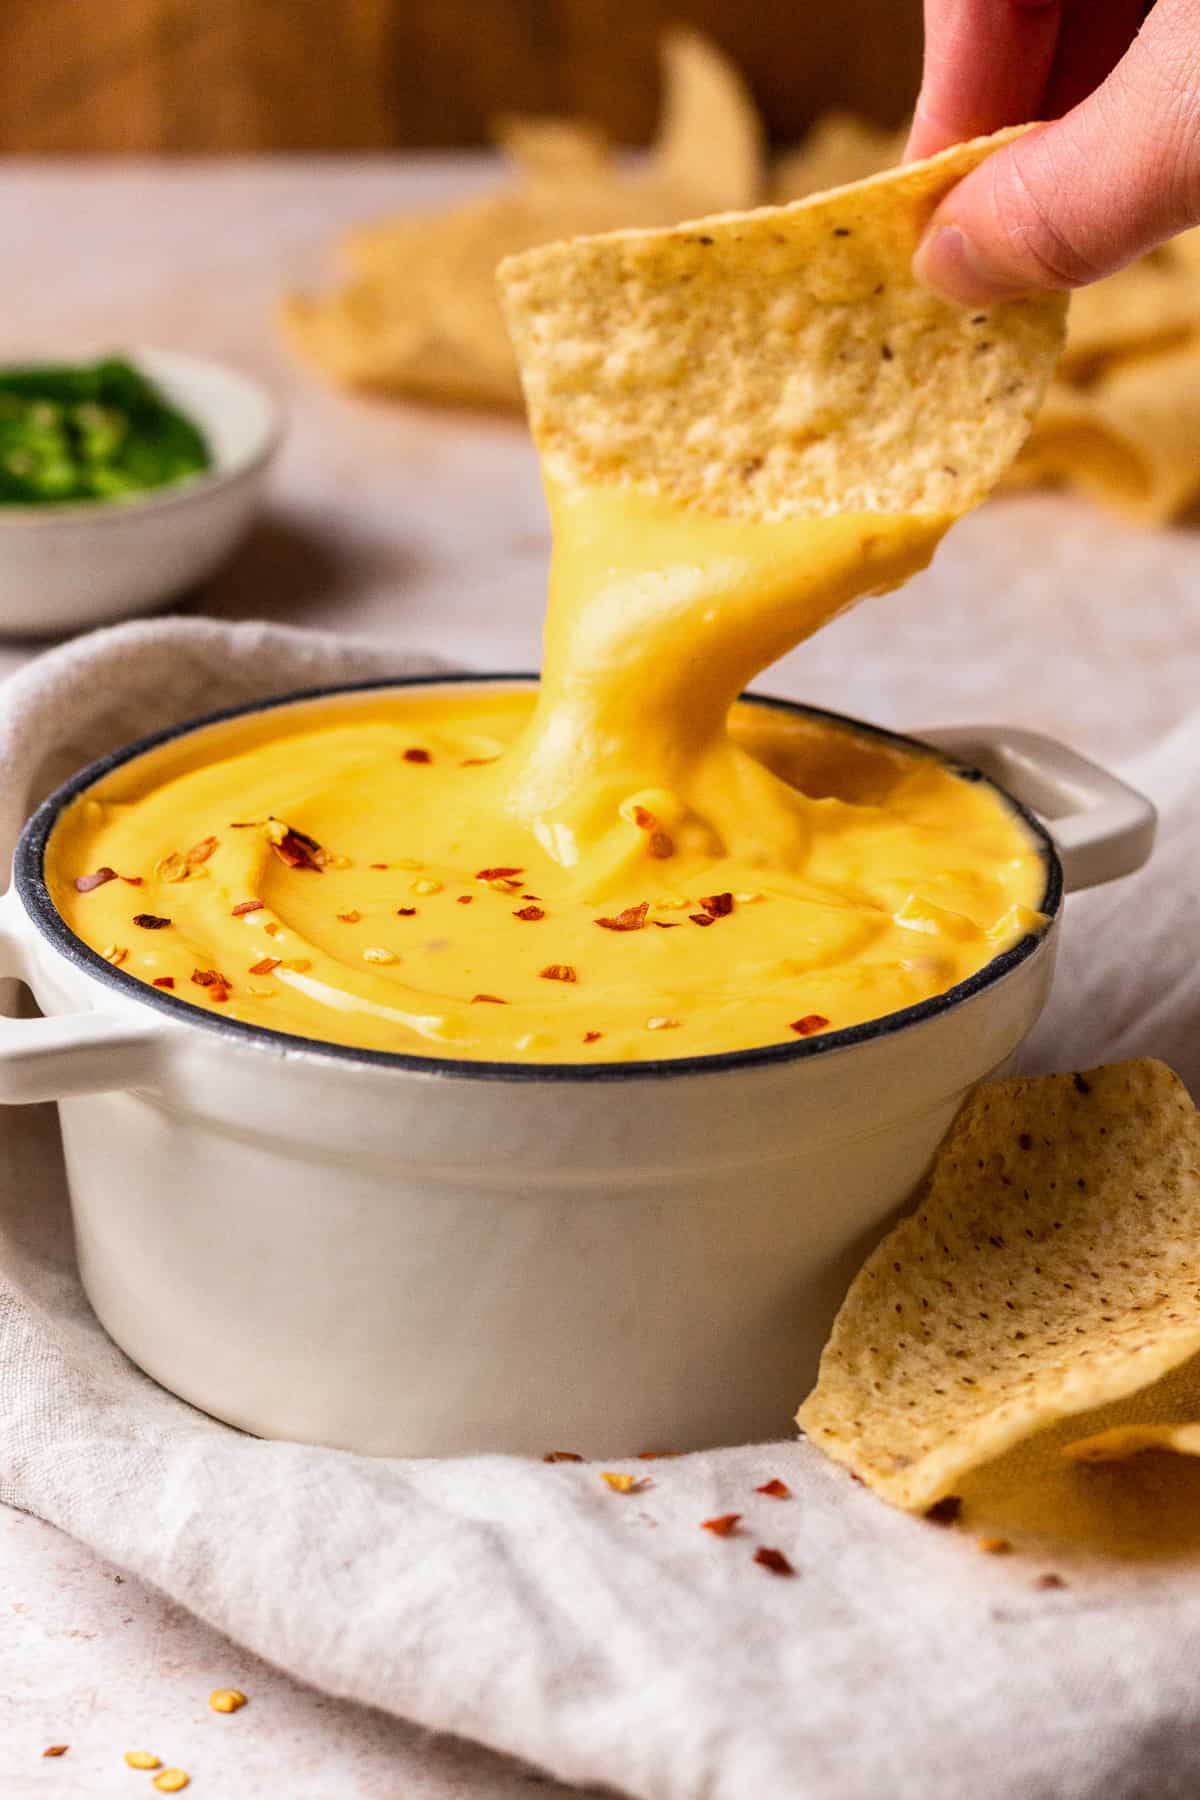 Easy Cheese Cheddar Cheese Snack, 12 - 8 oz Cans